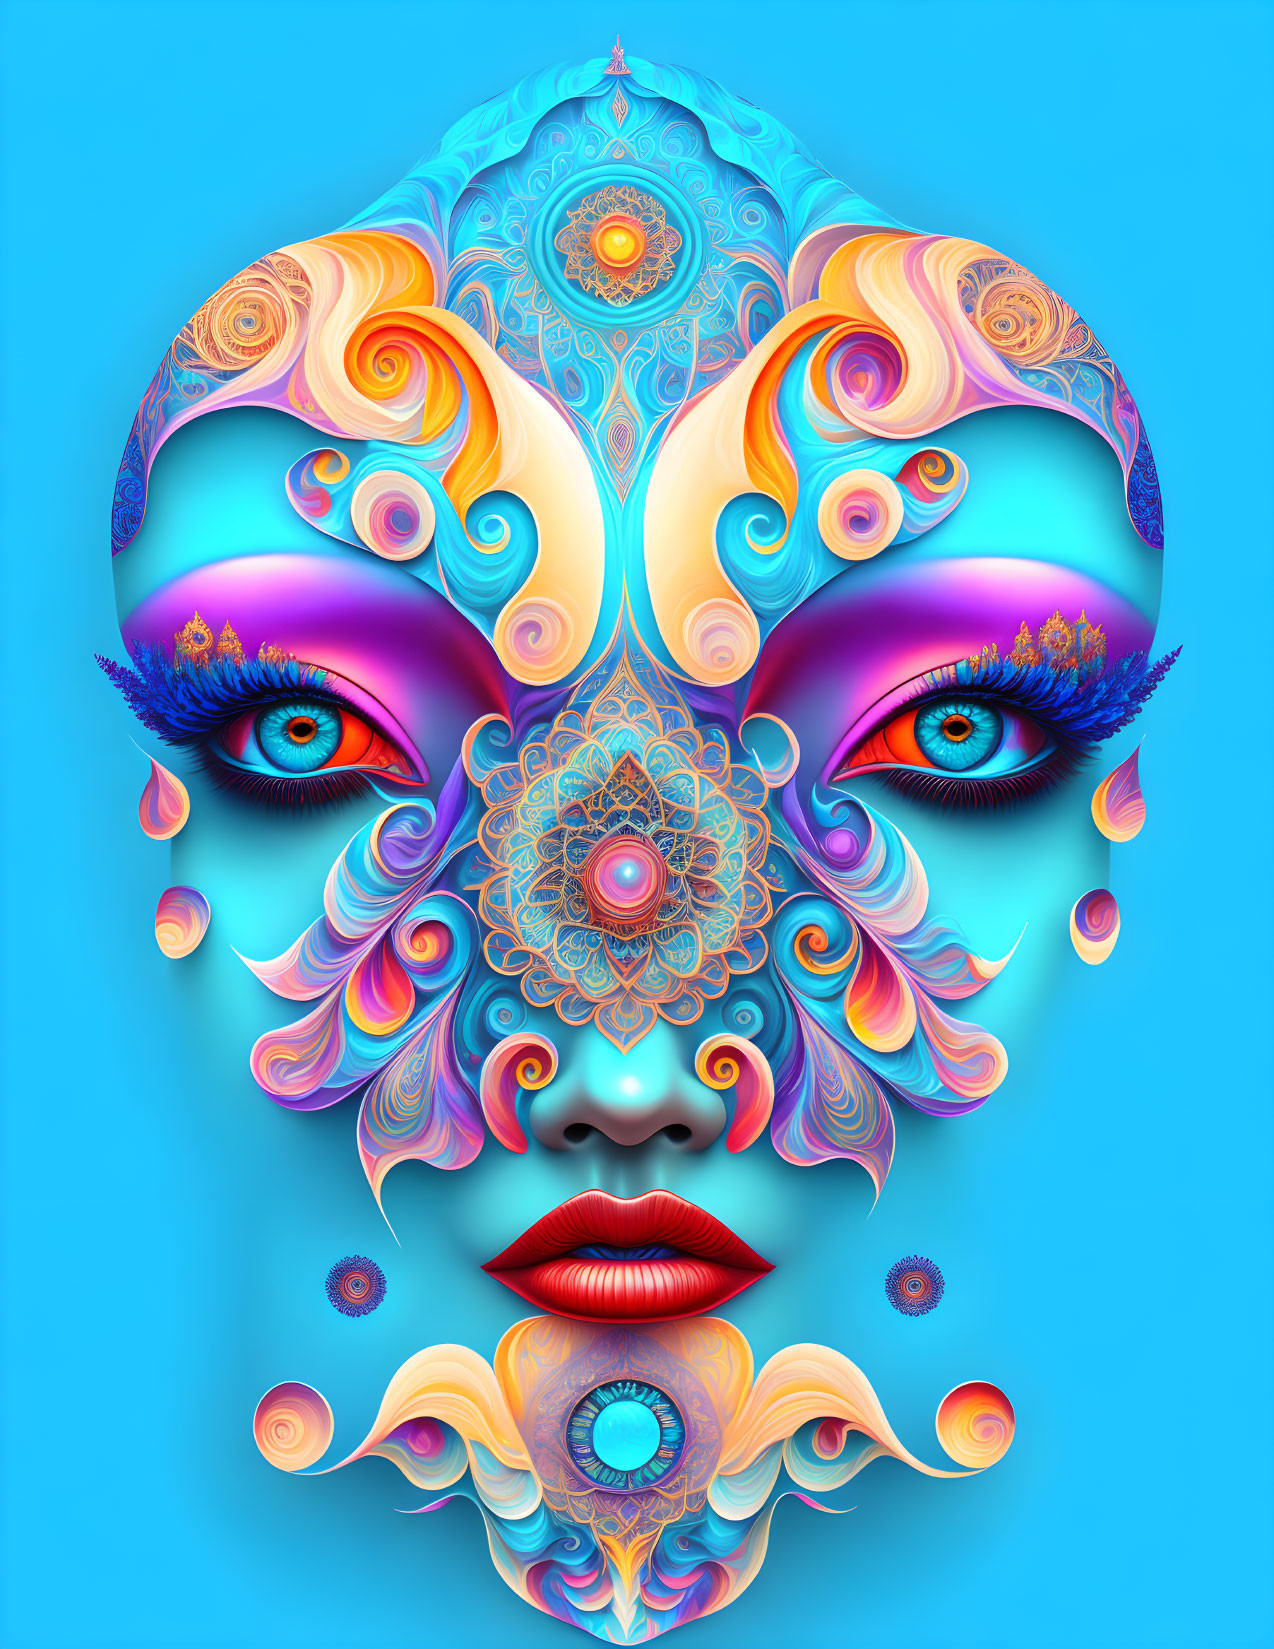 surreal abstract face with intricate flourishes